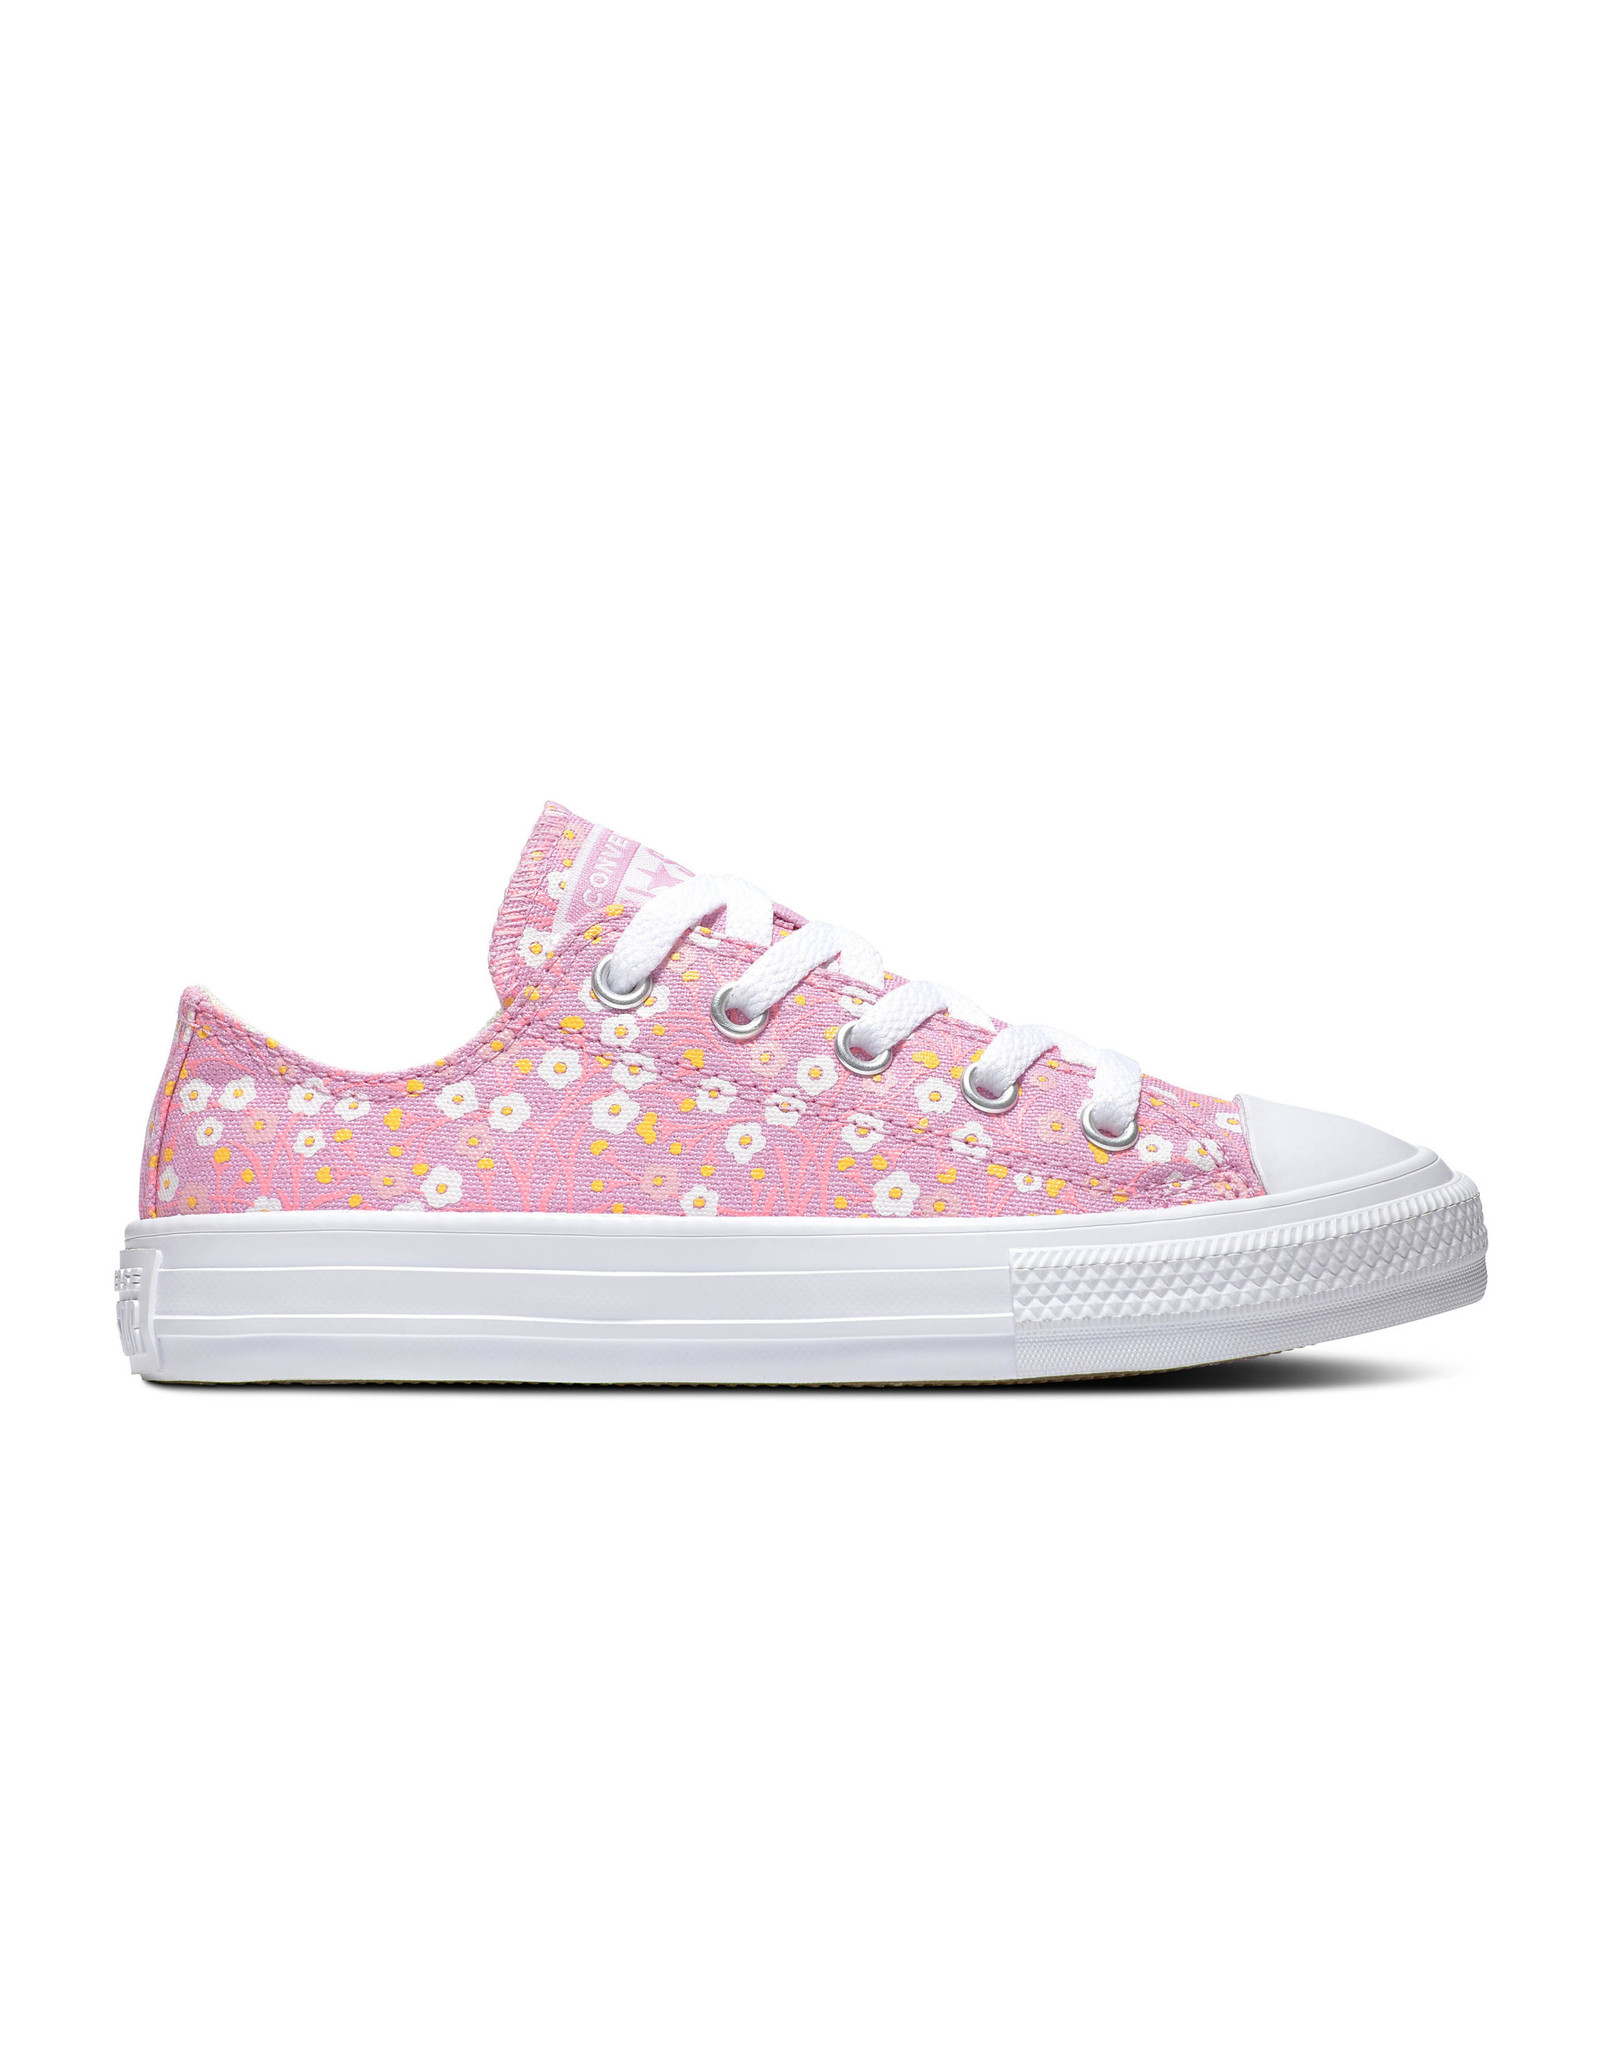 CHUCK TAYLOR ALL STAR  OX PEONY PINK/TOPAZ GOLD/WHITE CAPEF-666881C